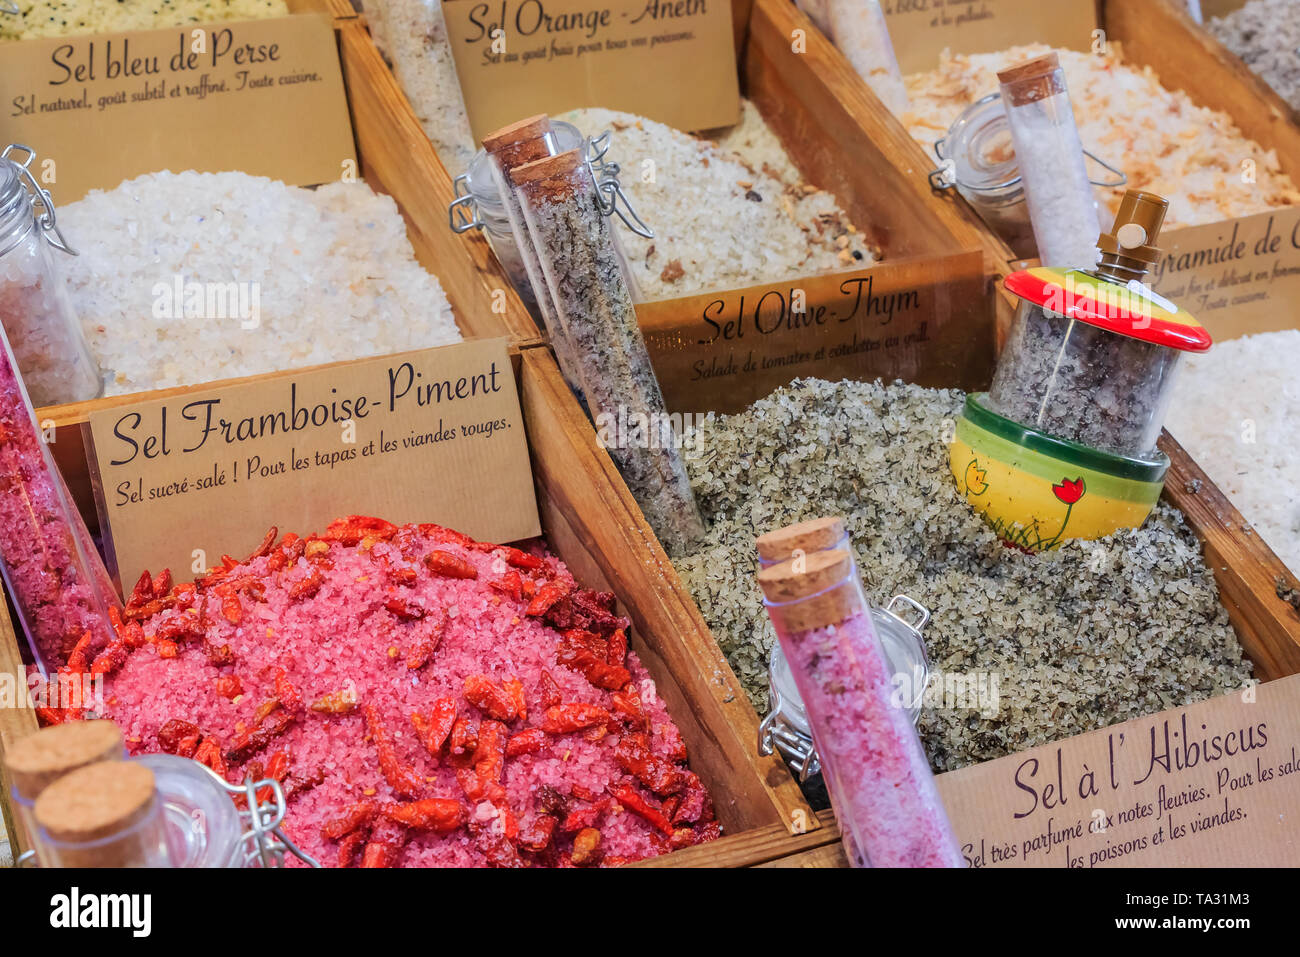 Exotic flavored salts with thyme, orange, strawberry chili and other herbs and spices for sale at a local outdoor farmers market in Nice, France Stock Photo